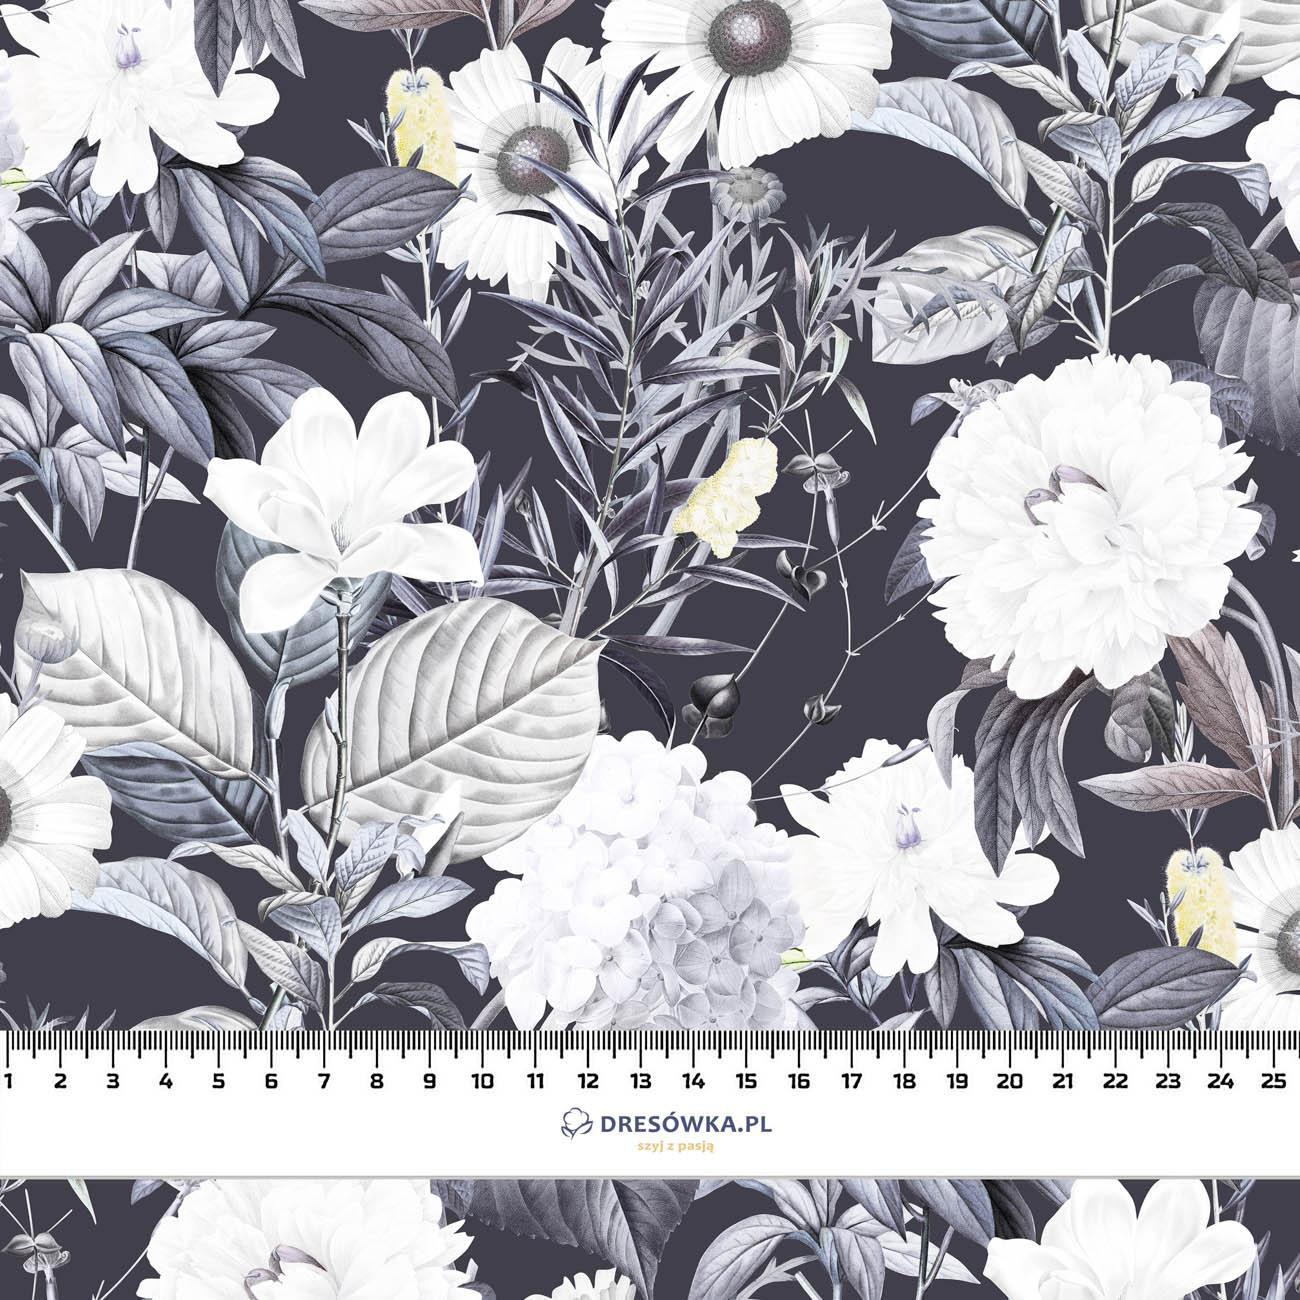 LUXE BLOSSOM pat. 4 - Cotton woven fabric